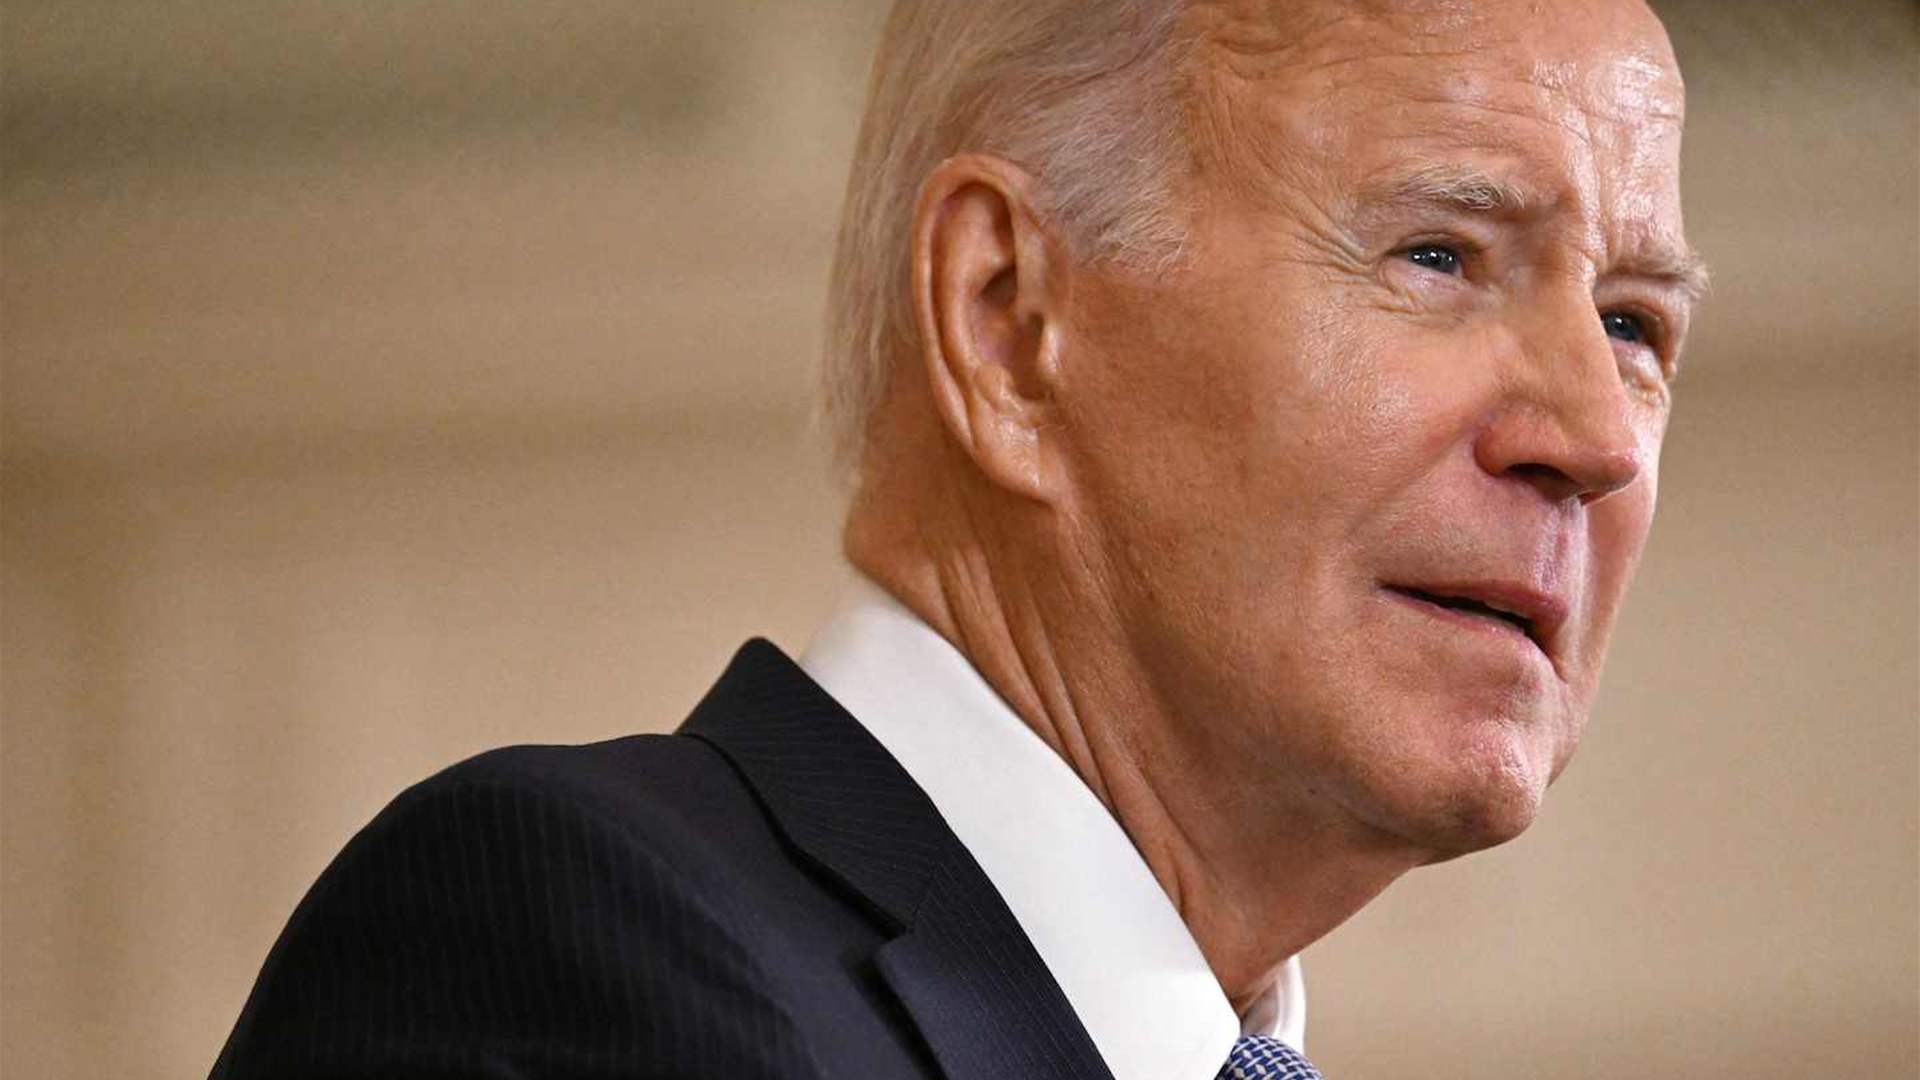 White House: Biden reaffirms firm commitment to Israel&#39;s security in call with Netanyahu